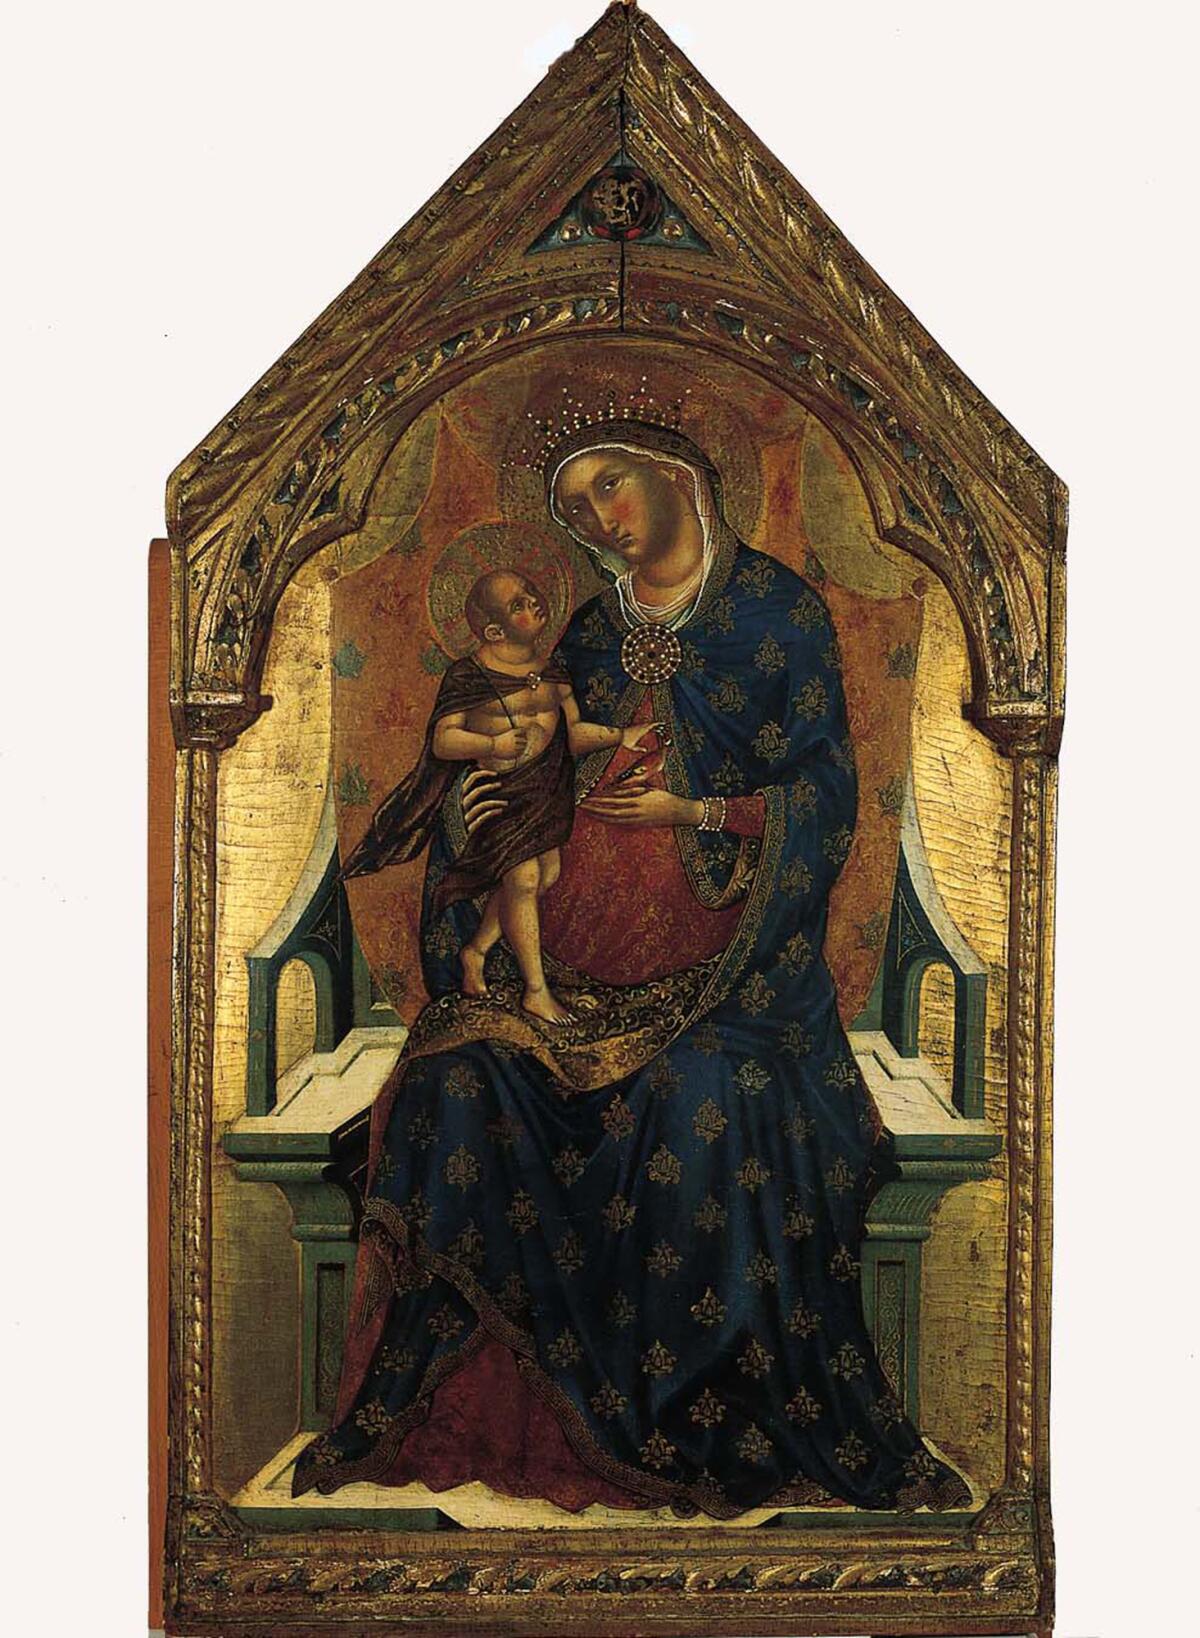 A Paolo Veneziano depiction of baby Jesus standing, adult-like, on Mary's knee.